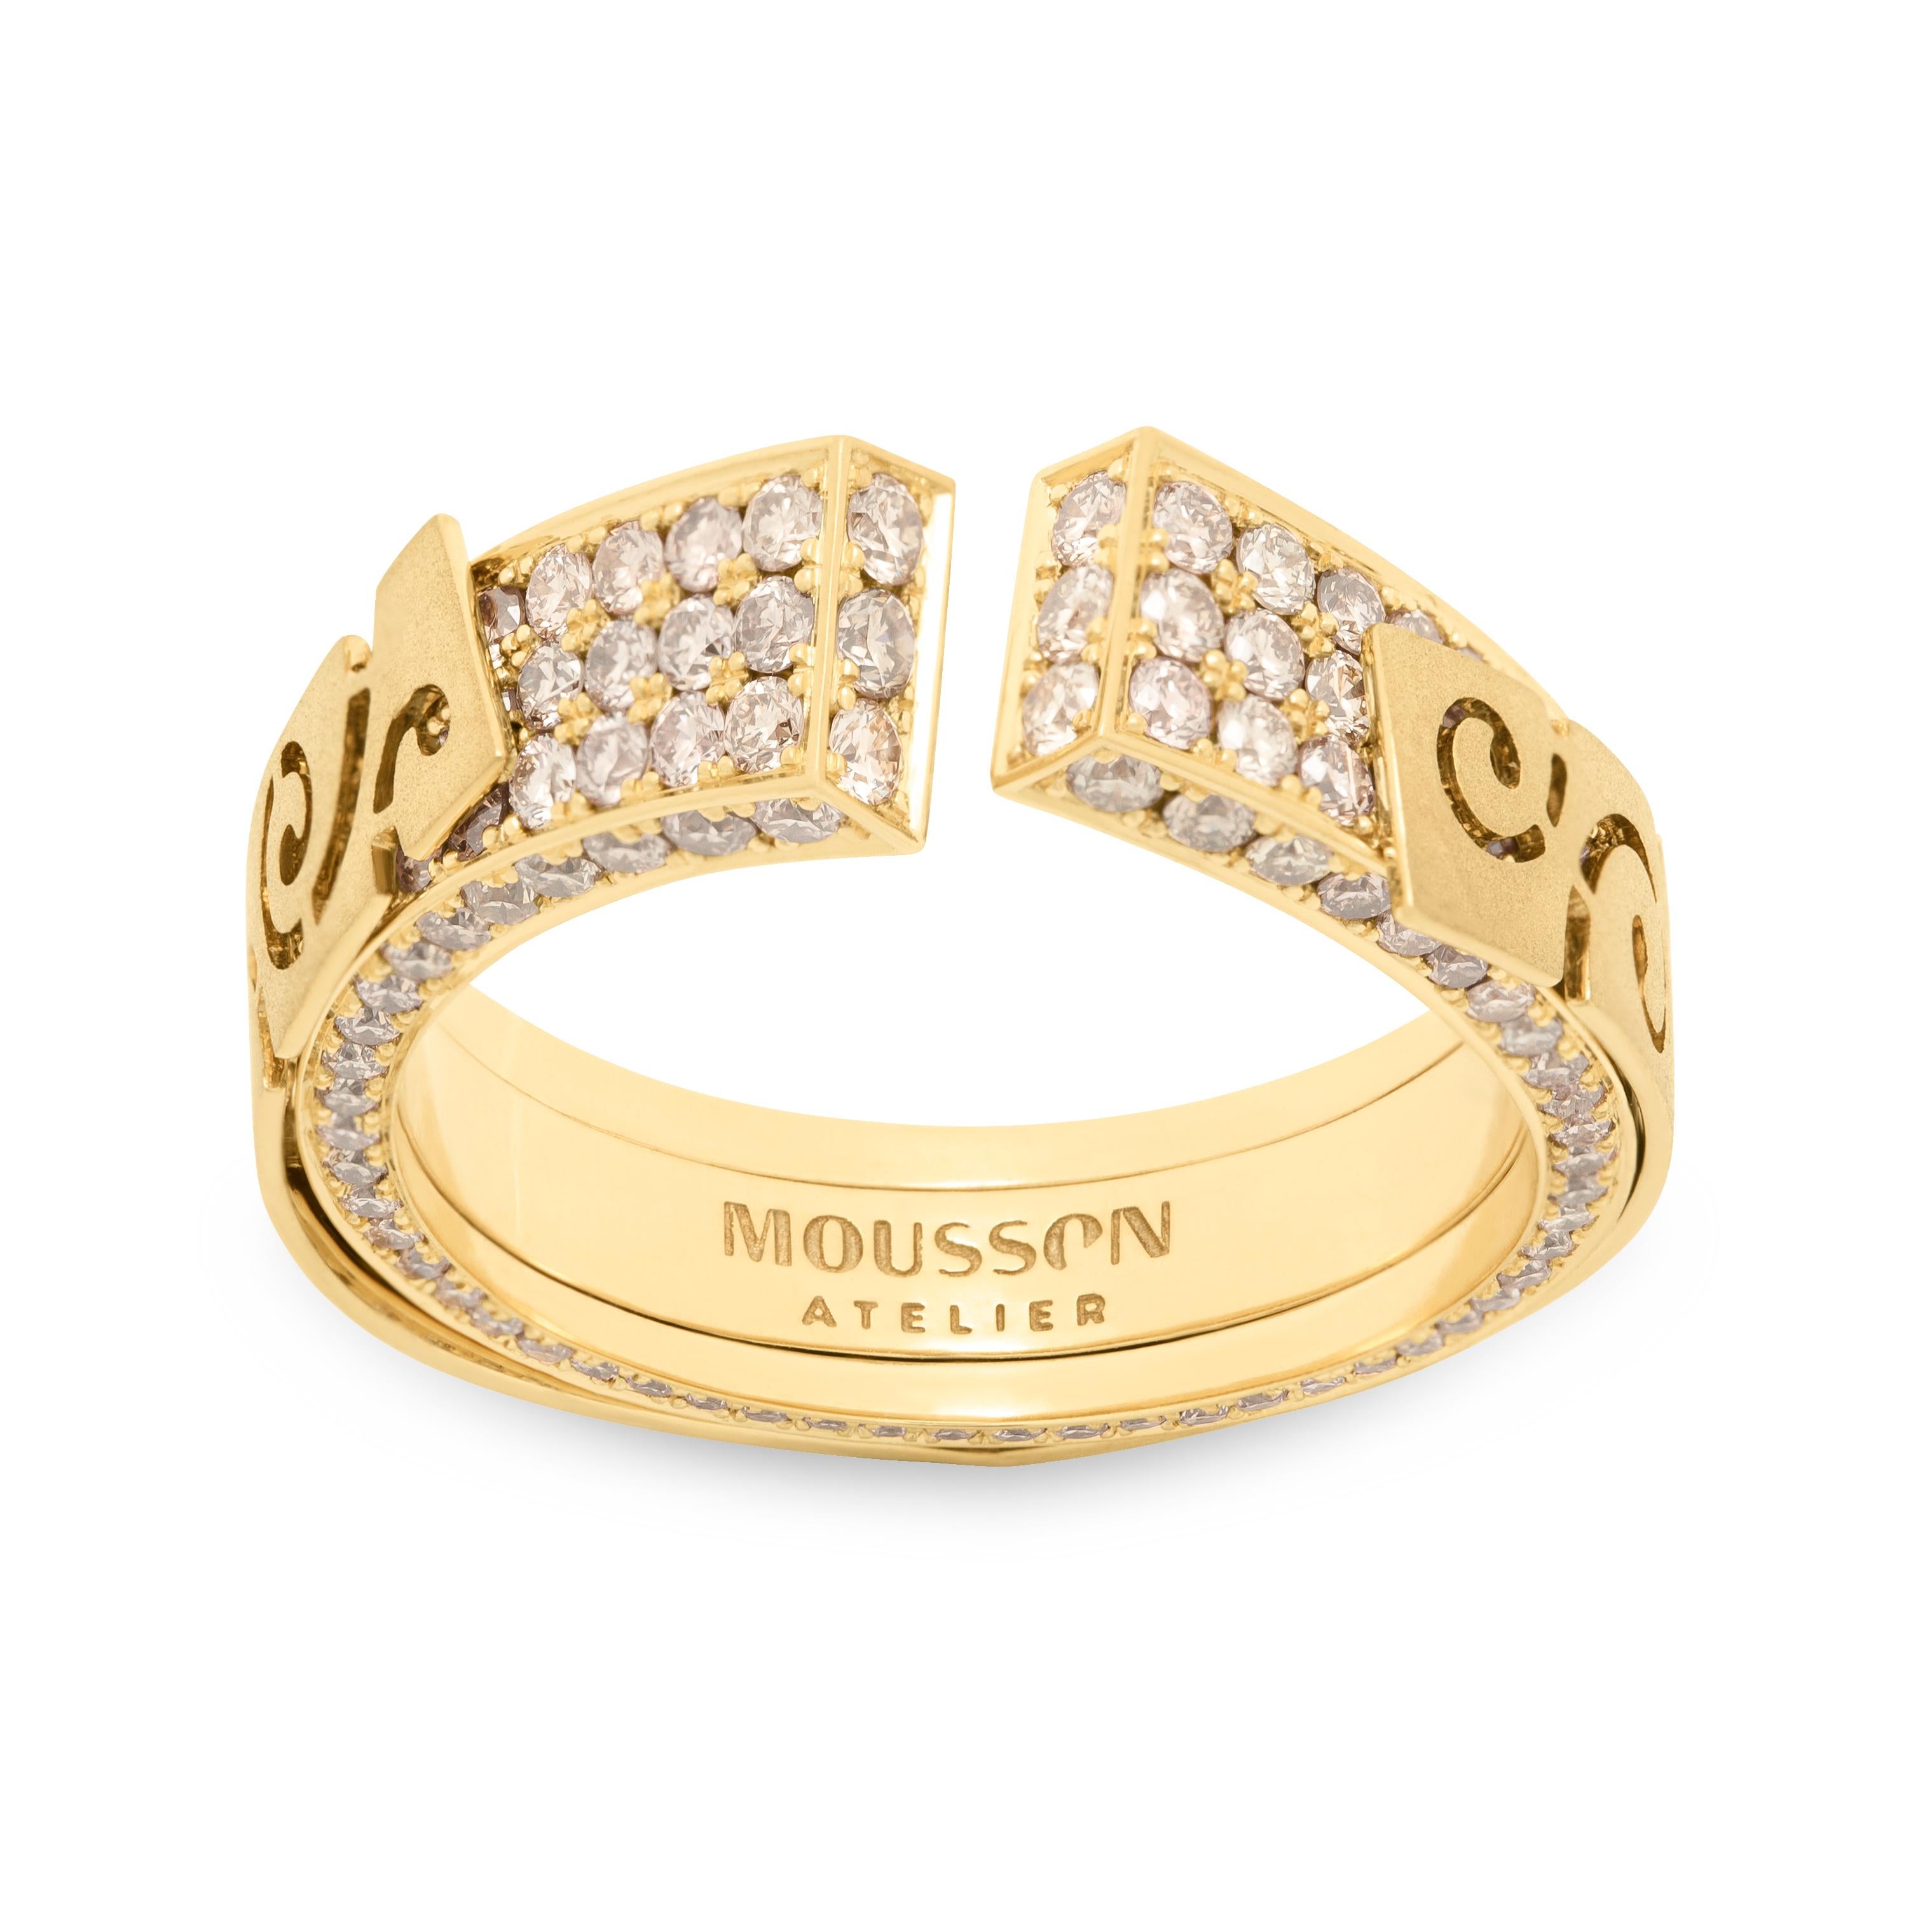 Champagne Diamonds 18 Karat Yellow Gold Small Veil Ring
Veil inspired this jewelry series by our designers. For example, this Ring seems to have two layers. The first layer is a 